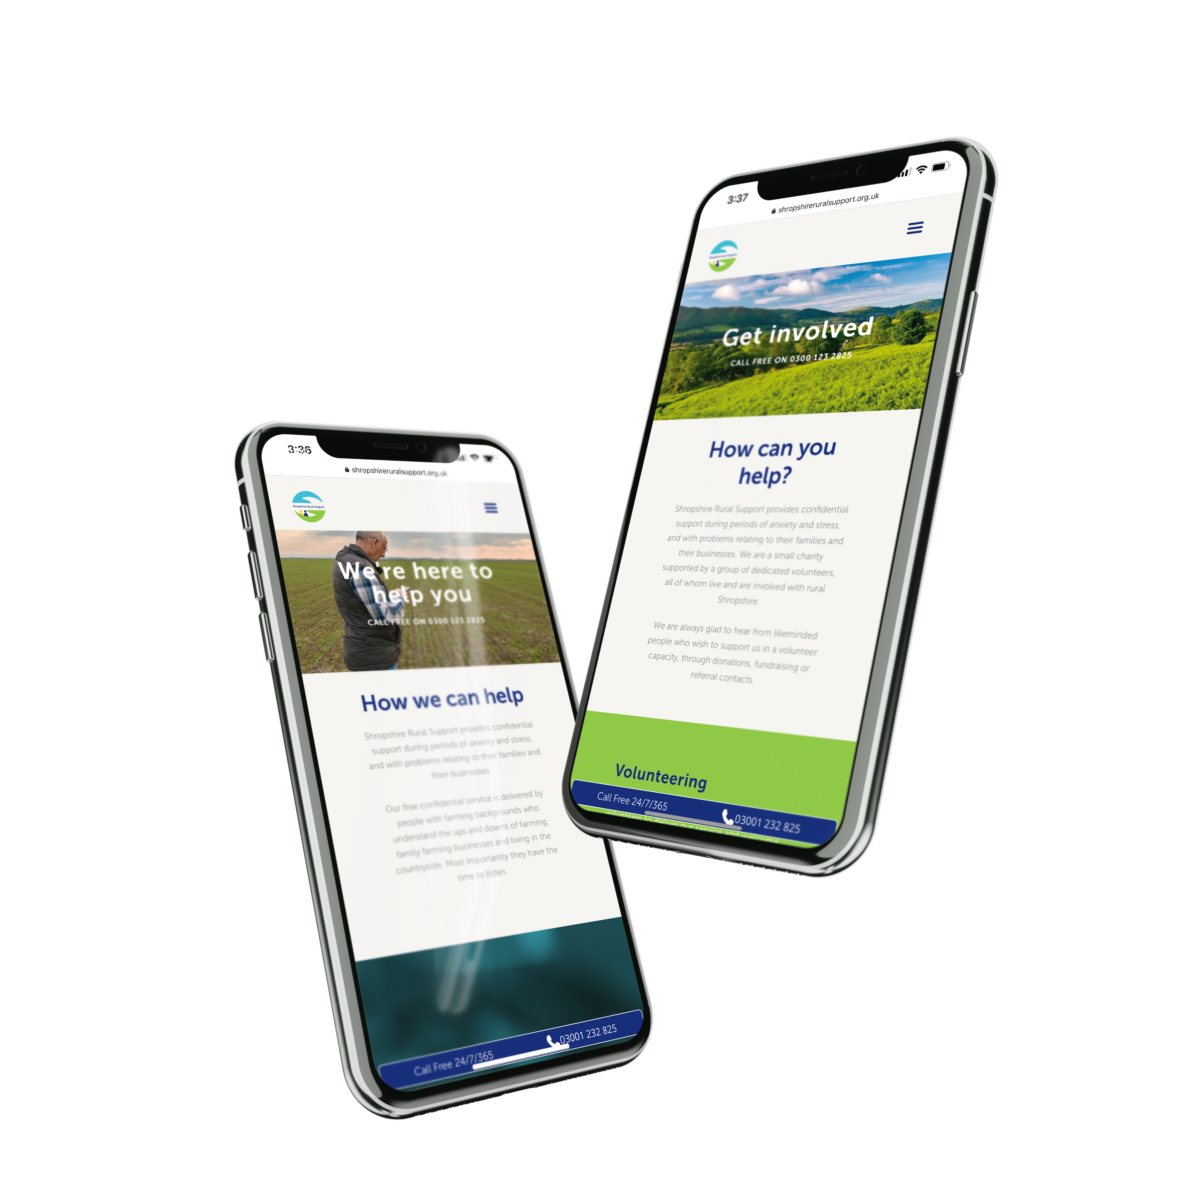 Mobile version of Shropshire Rural Support website design created by Buy-From